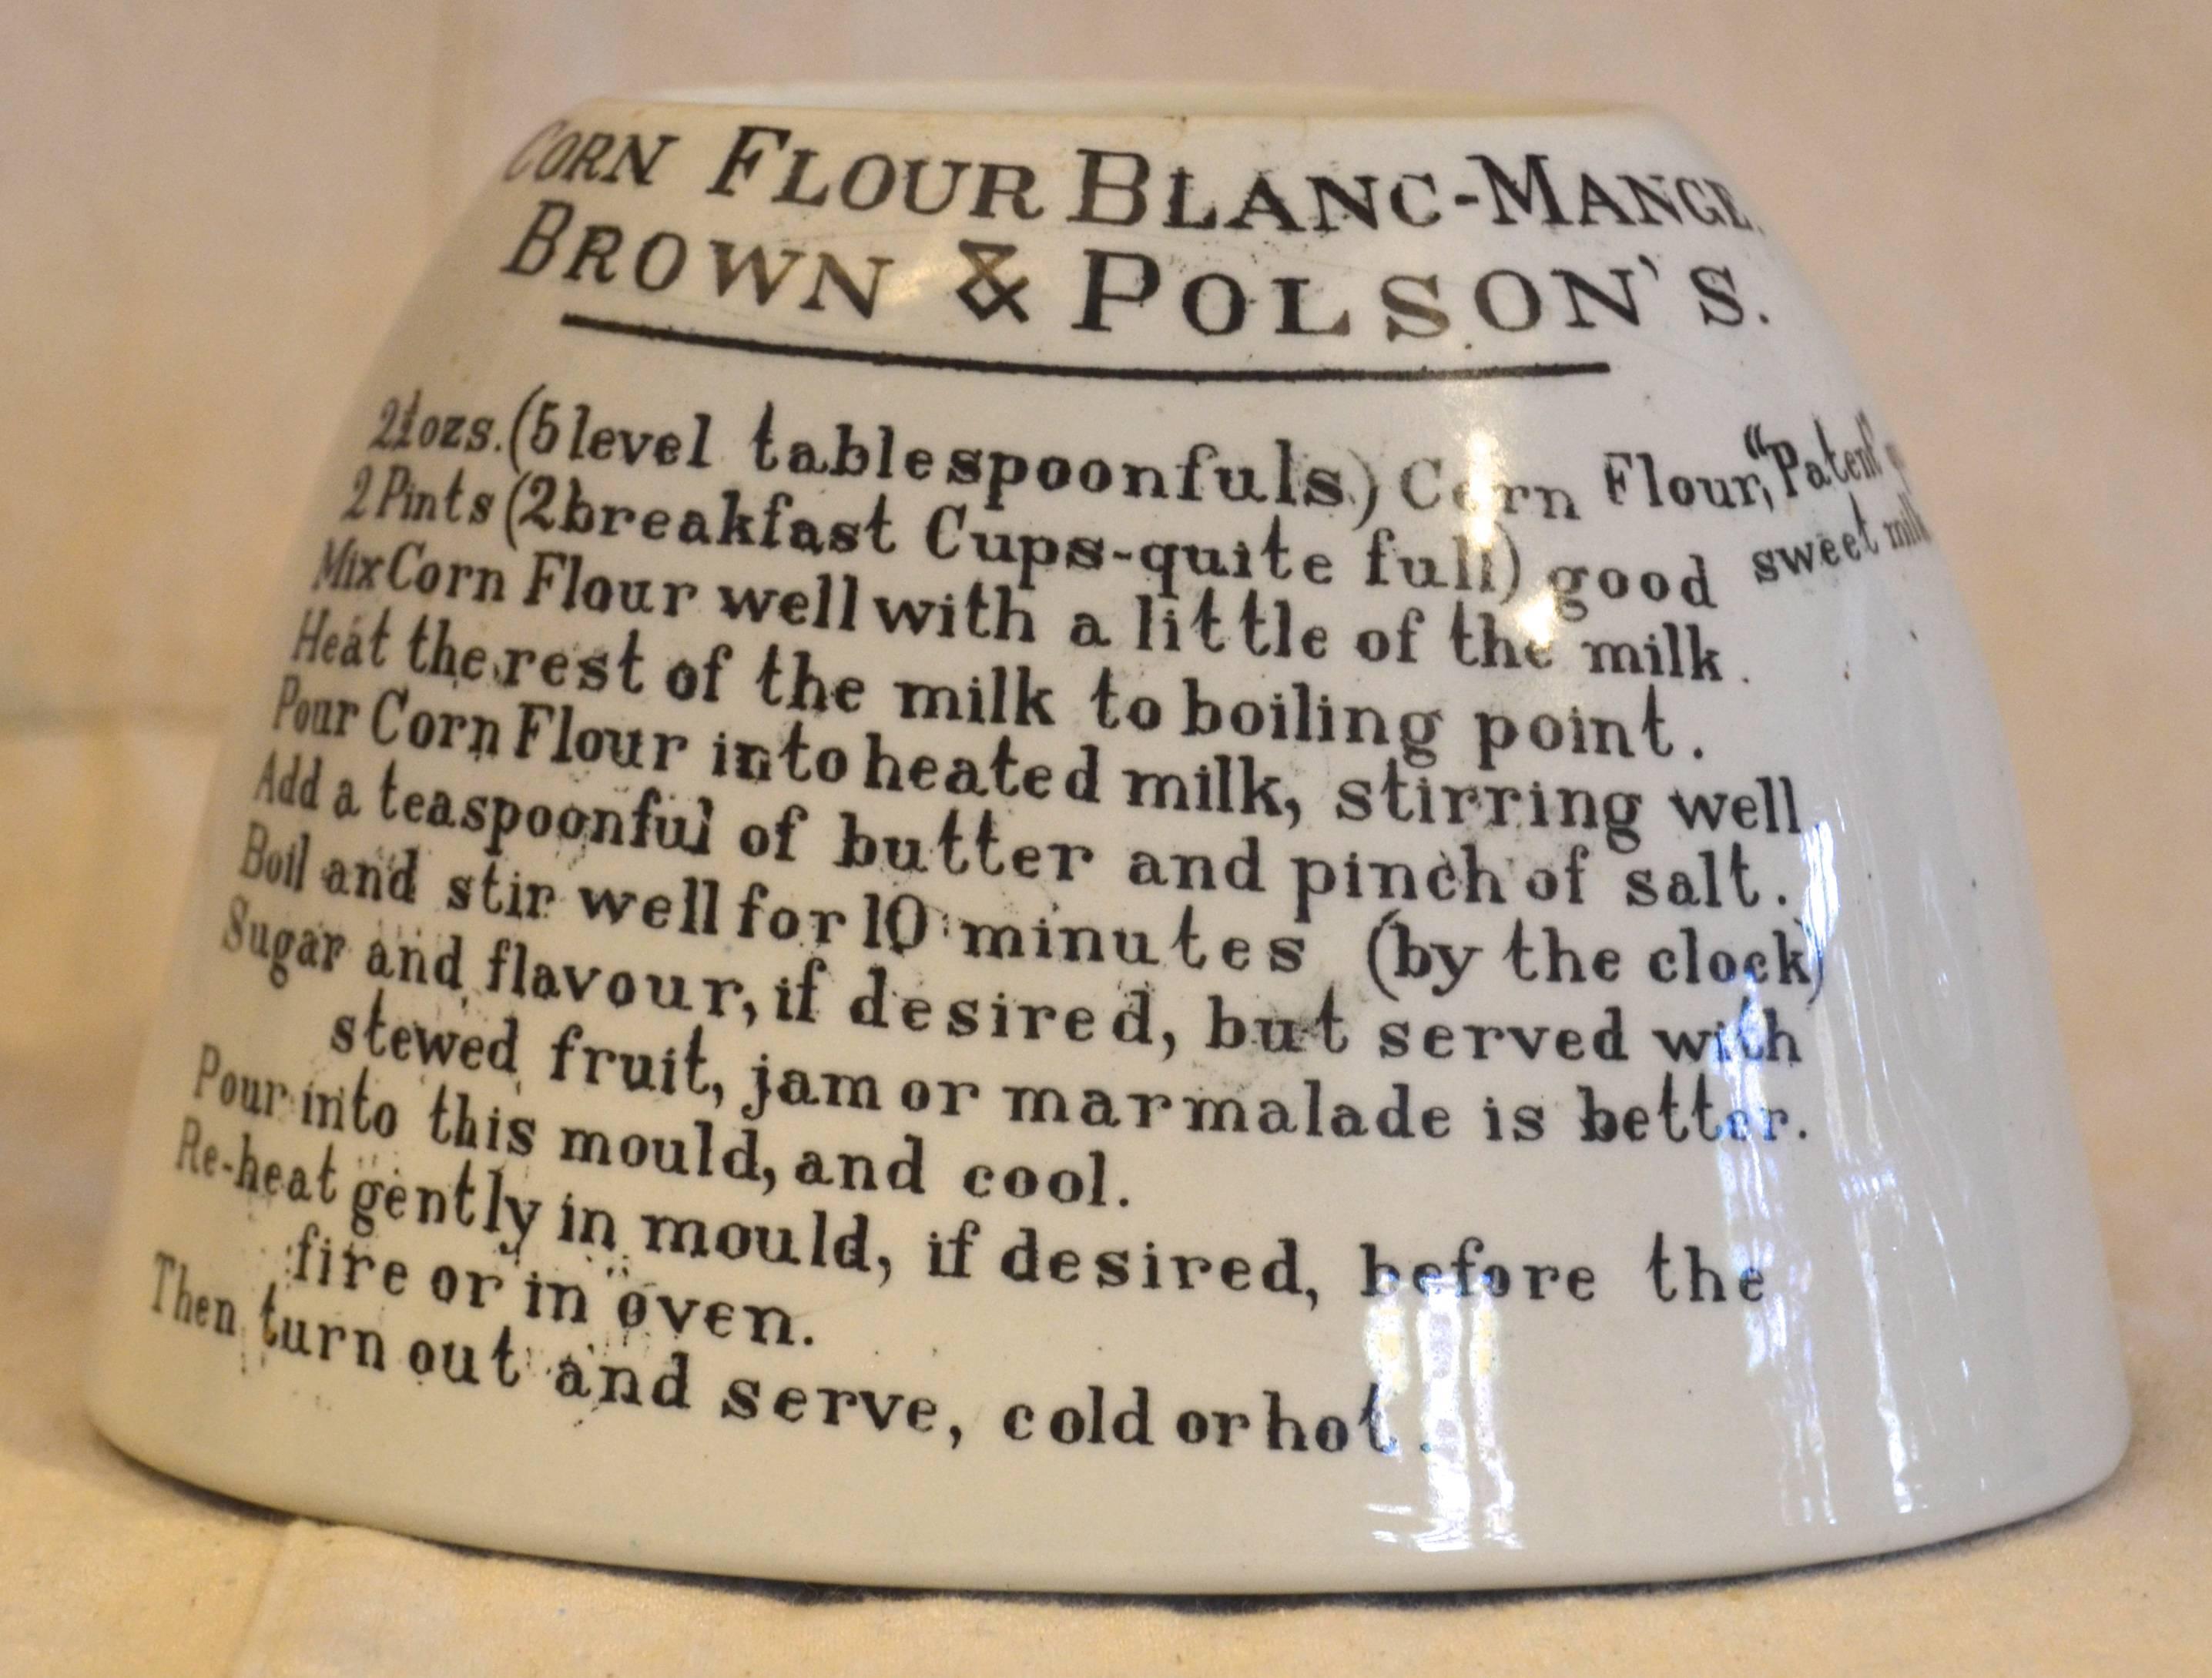 Great looking white ironstone kitchen mold with a transfer-printed recipe covering the outside of mold. Unusual example of Victorian advertising kitchenware.